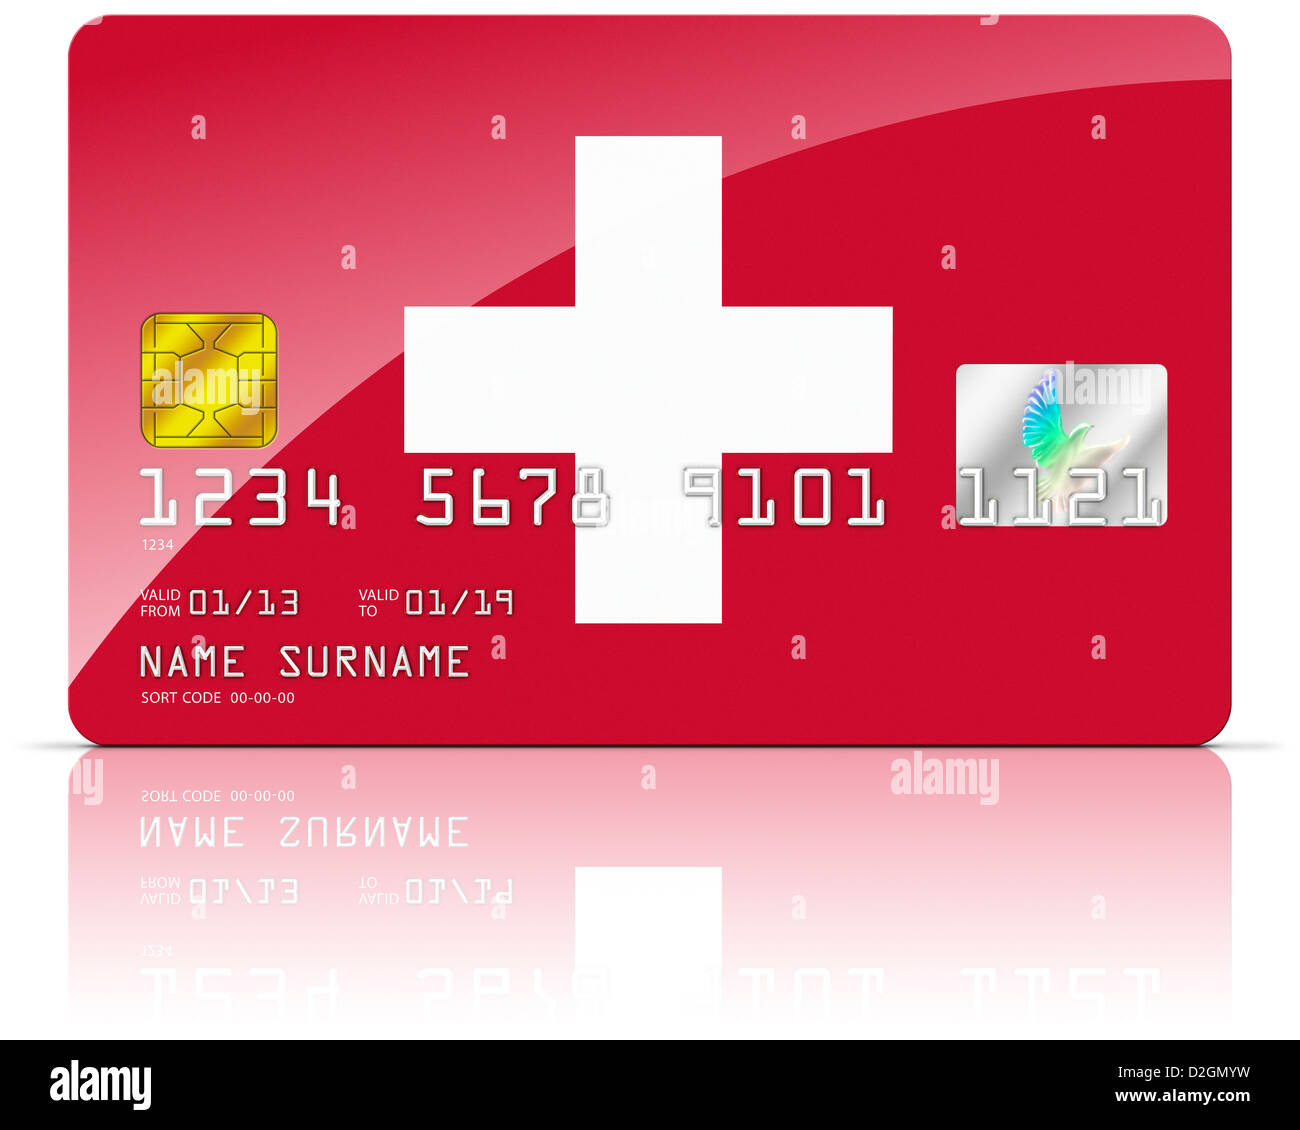 Switzerland credit card. Clipping path included Stock Photo - Alamy